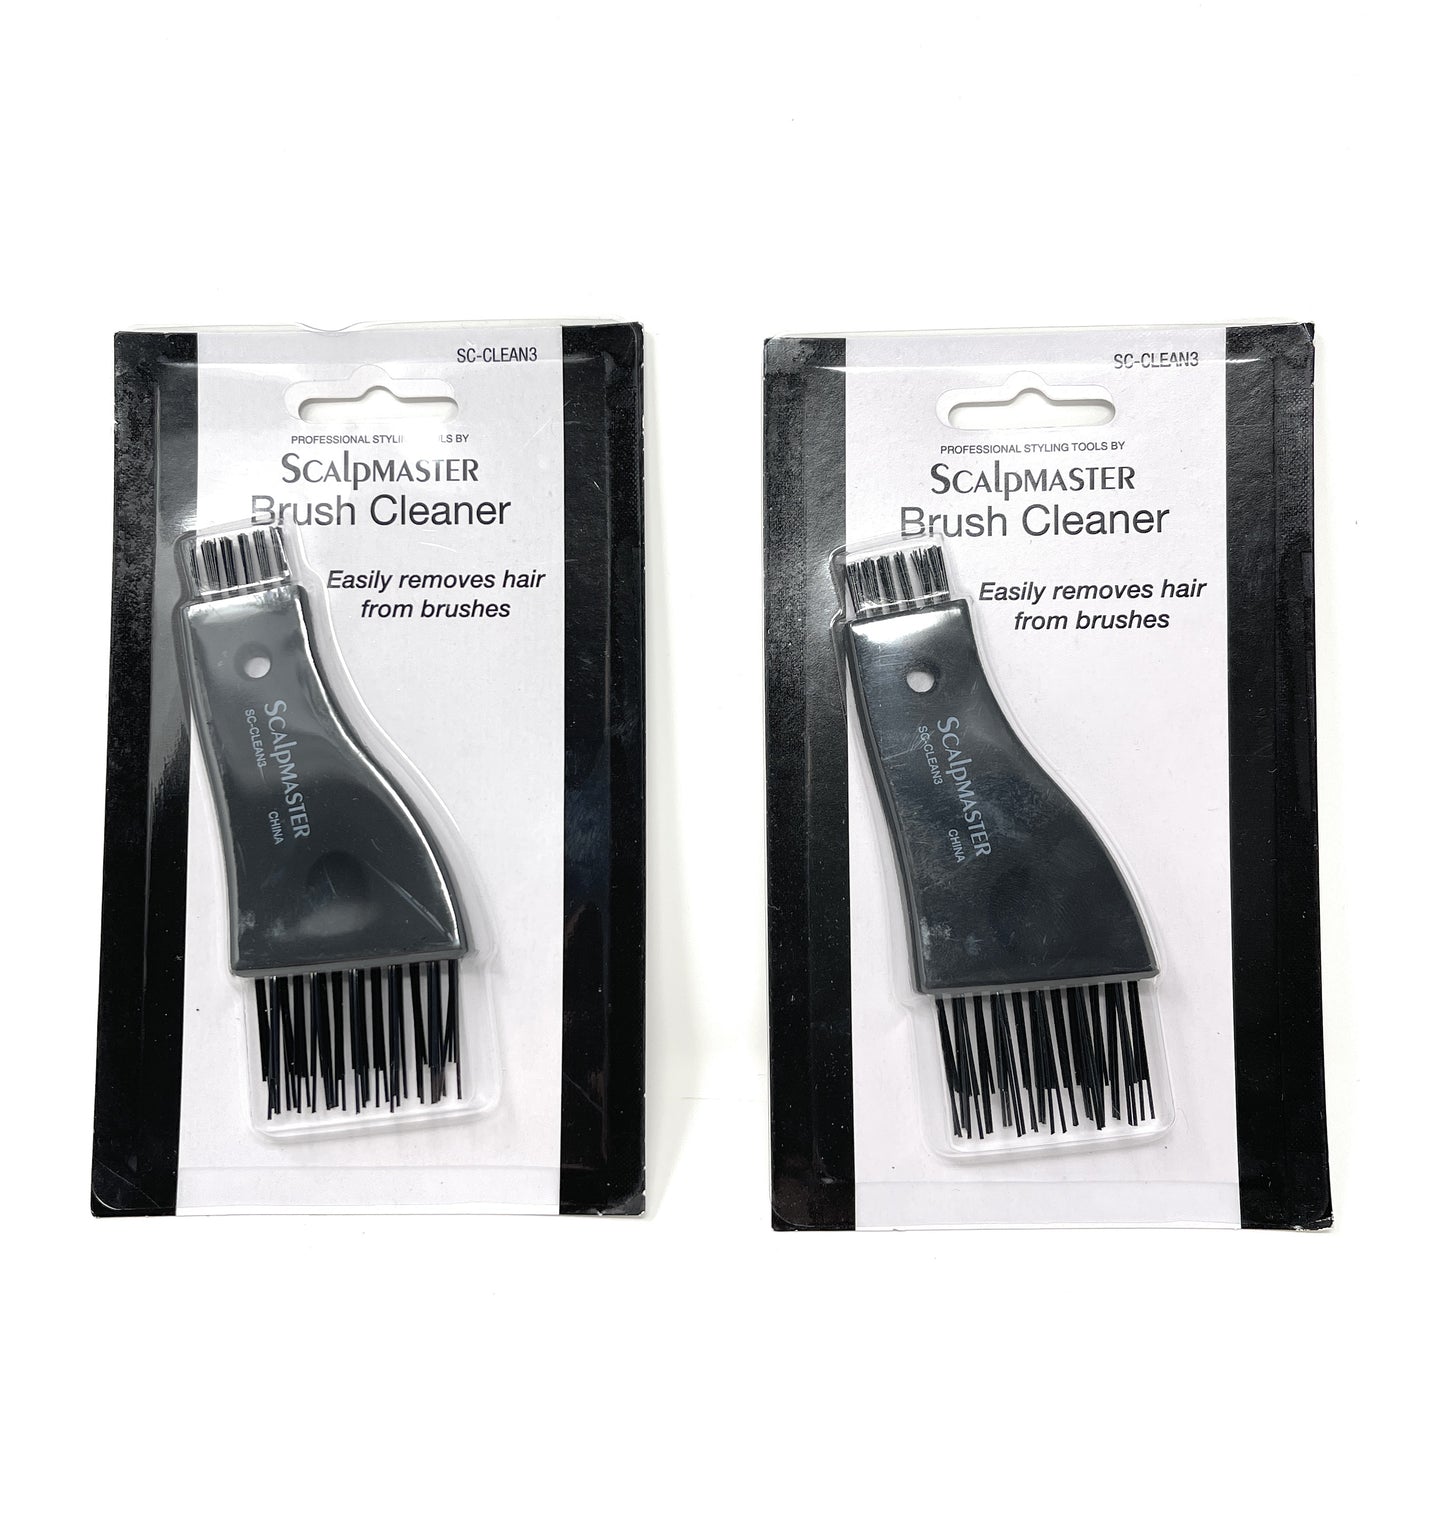 Scalpmaster Doubled Sided Clipper Cleaning Brush Black – diy hair company